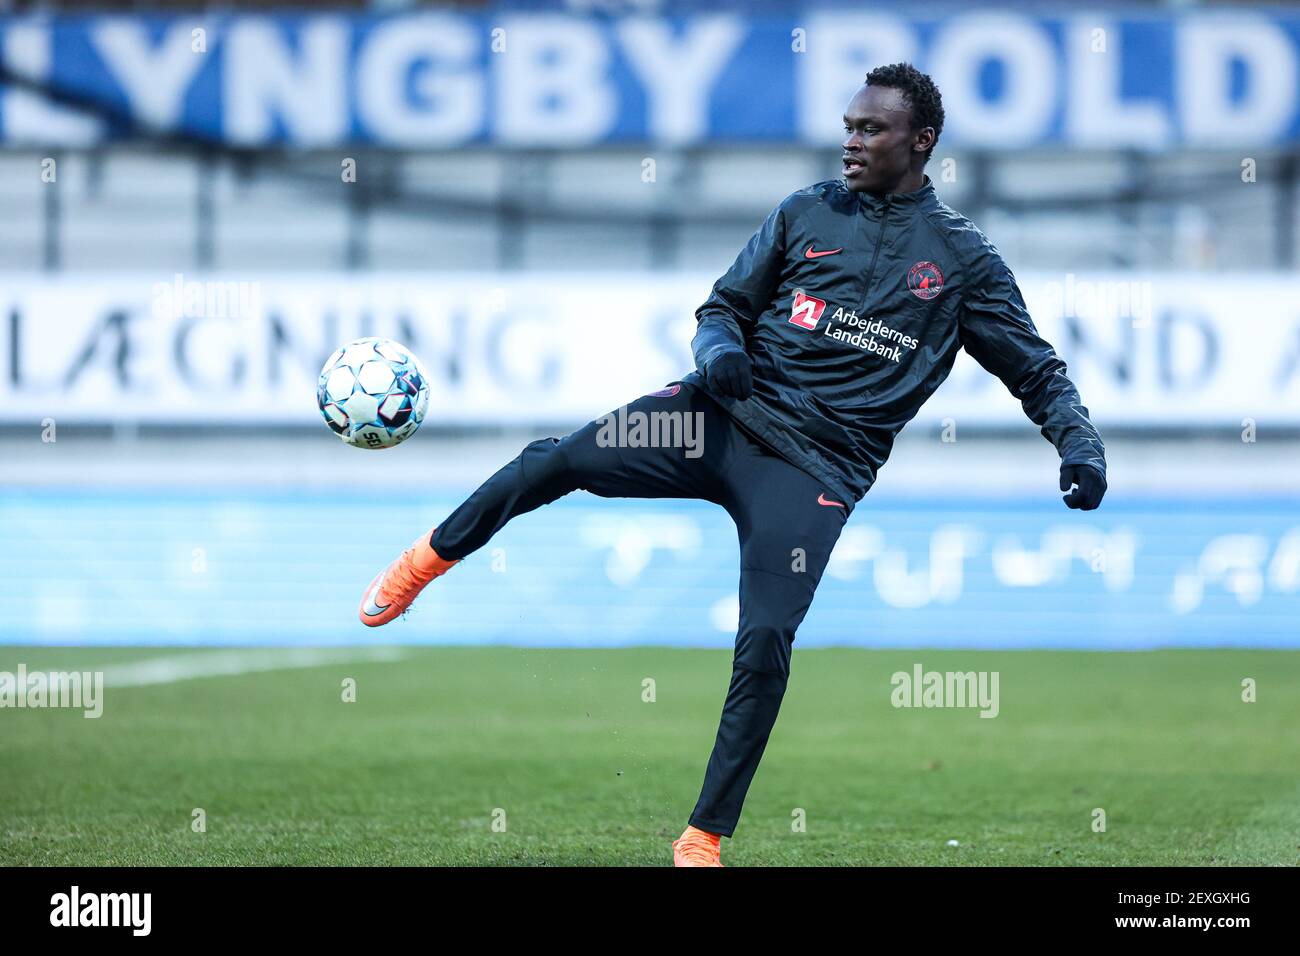 Kongens Lyngby, Denmark. 4th Mar, 2021. Pione Sisto (7) of FC Midtjylland warming up before the 3F Superliga match between Lyngby Boldklub and FC Midtjylland at Lyngby Stadion in Kongens Lyngby, Denmark. (Photo Credit: Gonzales Photo/Alamy Live News Stock Photo